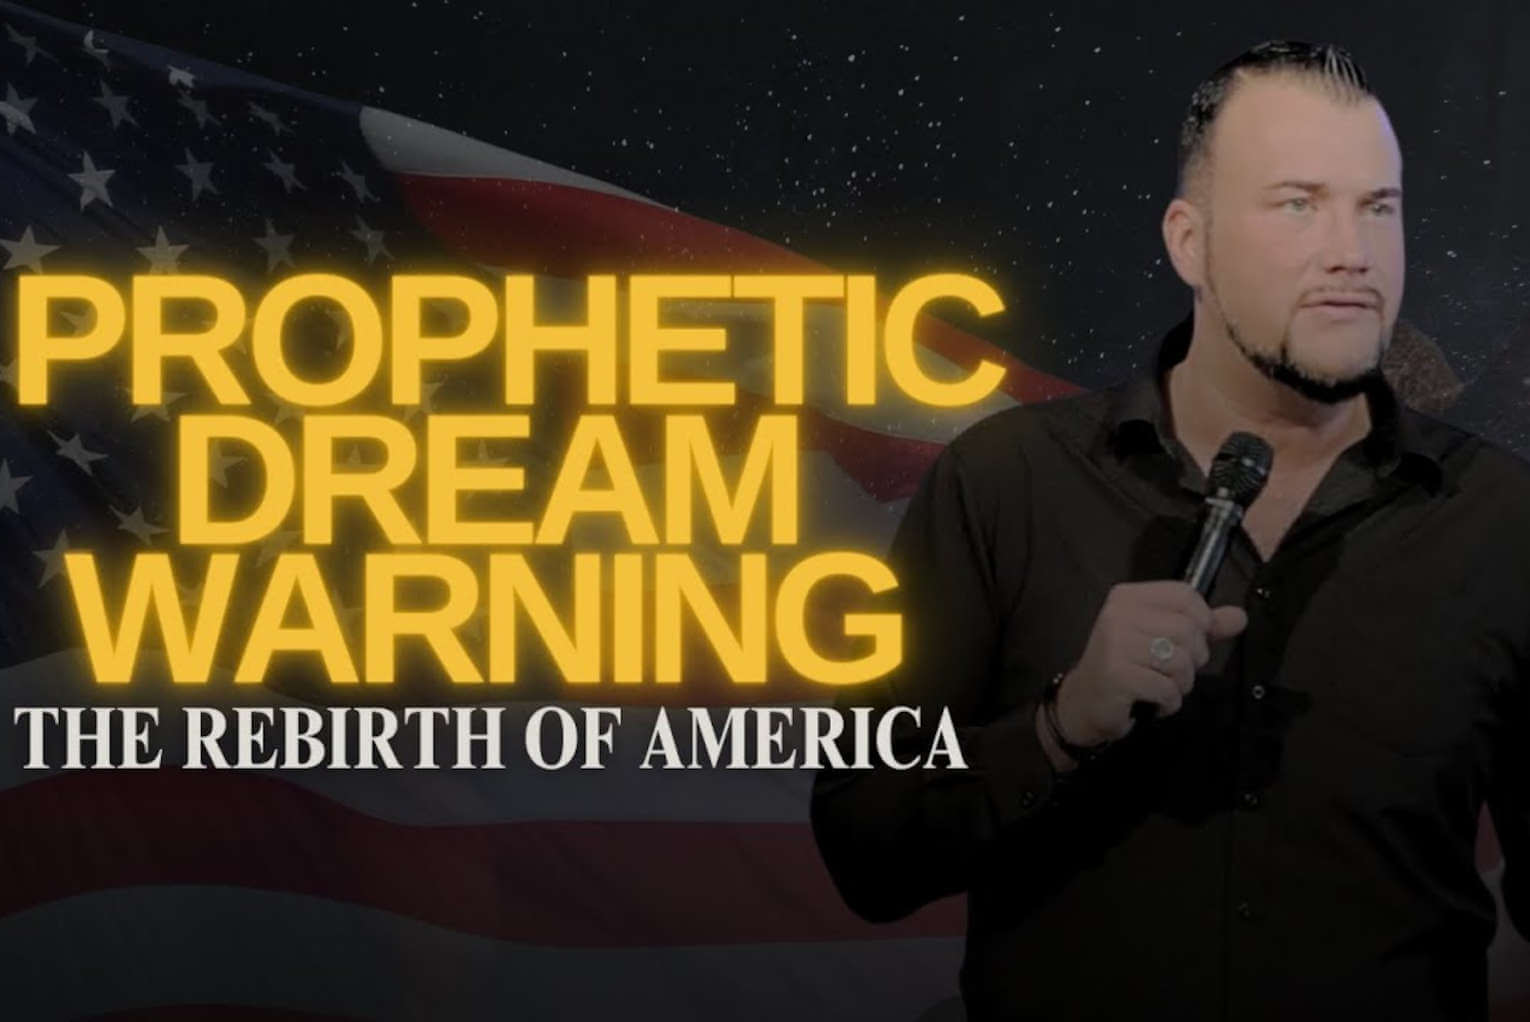 Chris Reed’s Prophetic Warning: America is Entering a Rebirth